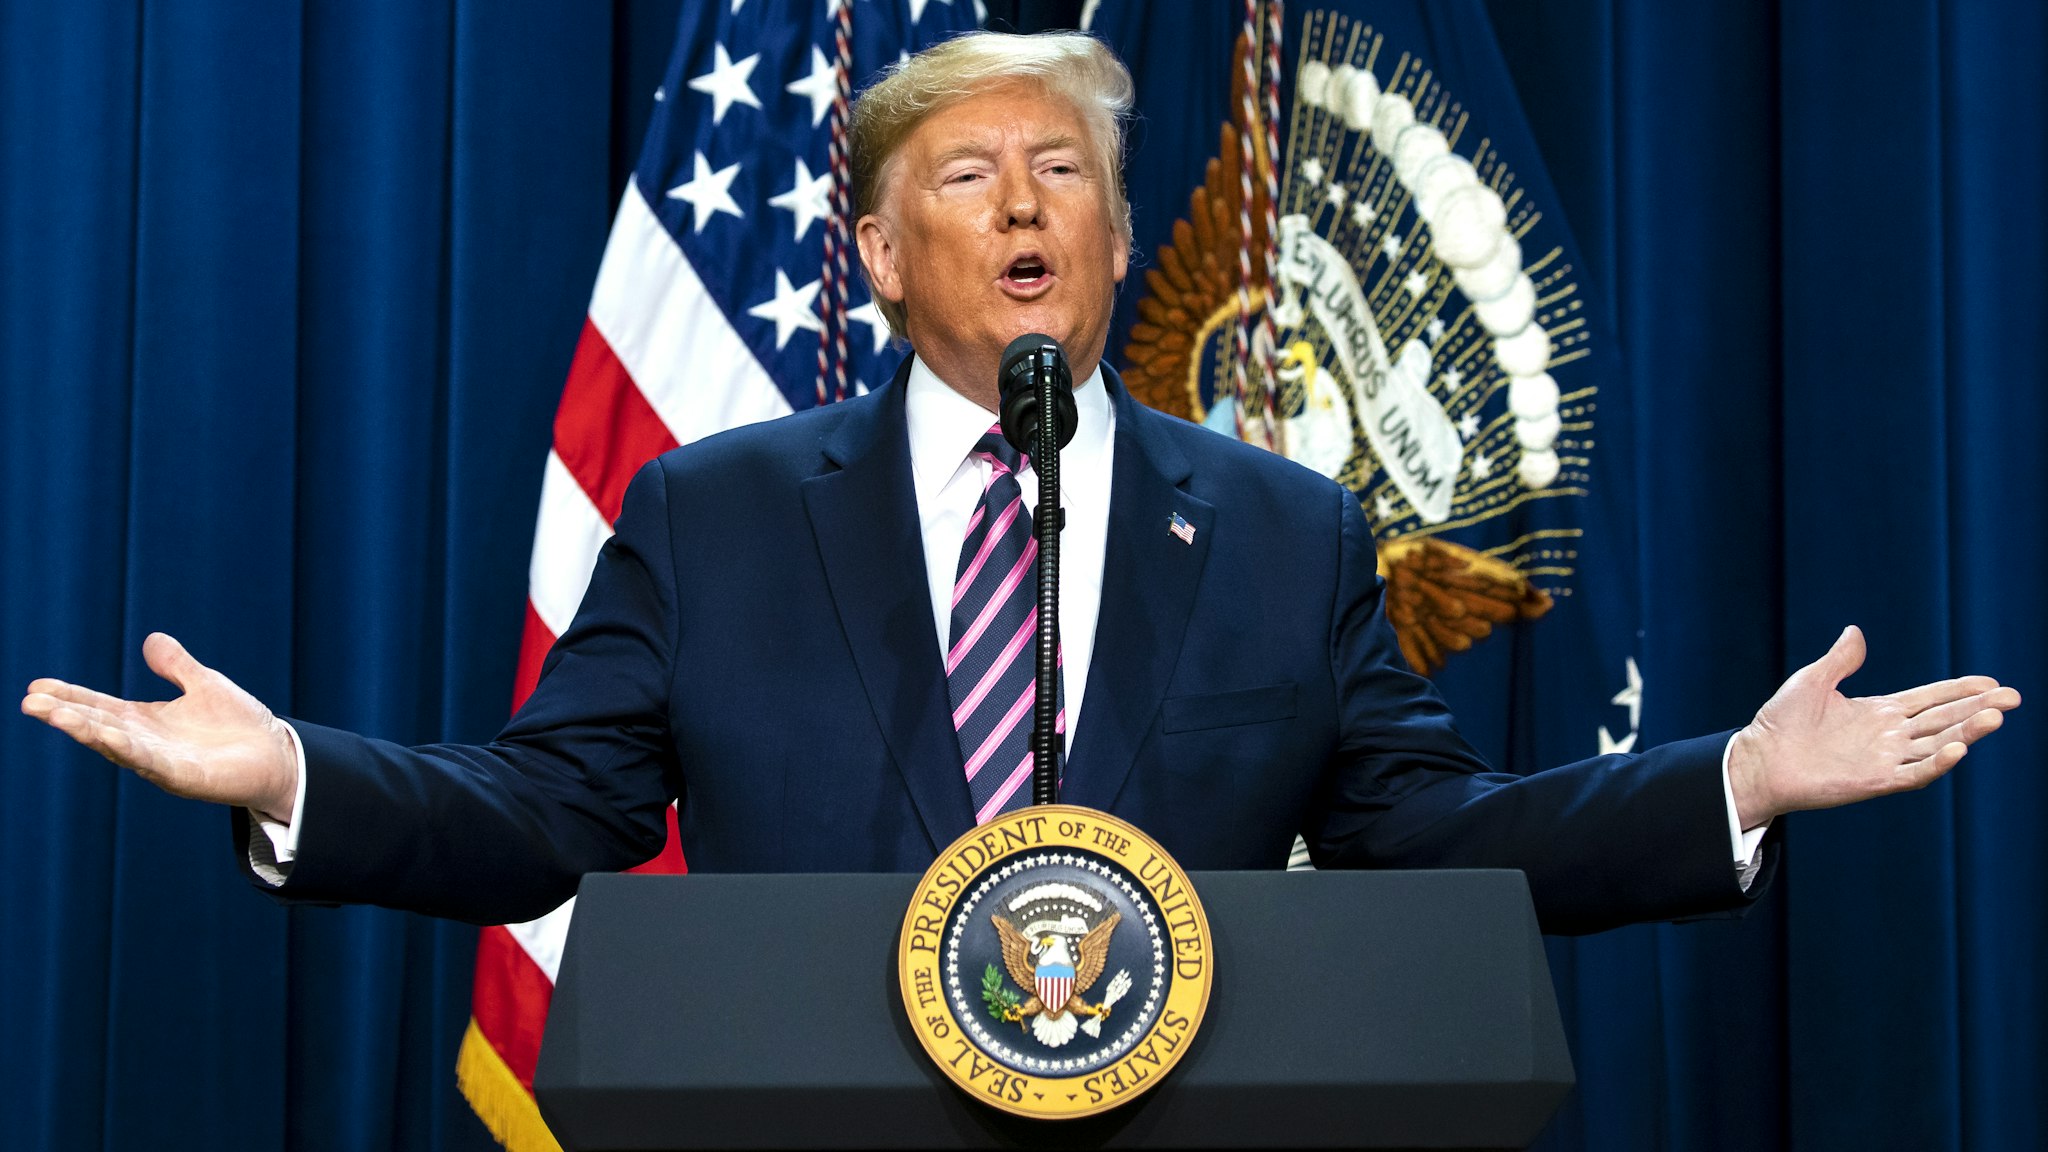 U.S. President Donald Trump speaks during an event at the Eisenhower Executive Office Building in Washington, D.C., U.S., on Thursday, Dec. 19, 2019. The summit was set to discuss mental health treatment as a way to combat homelessness, violence and substance abuse.